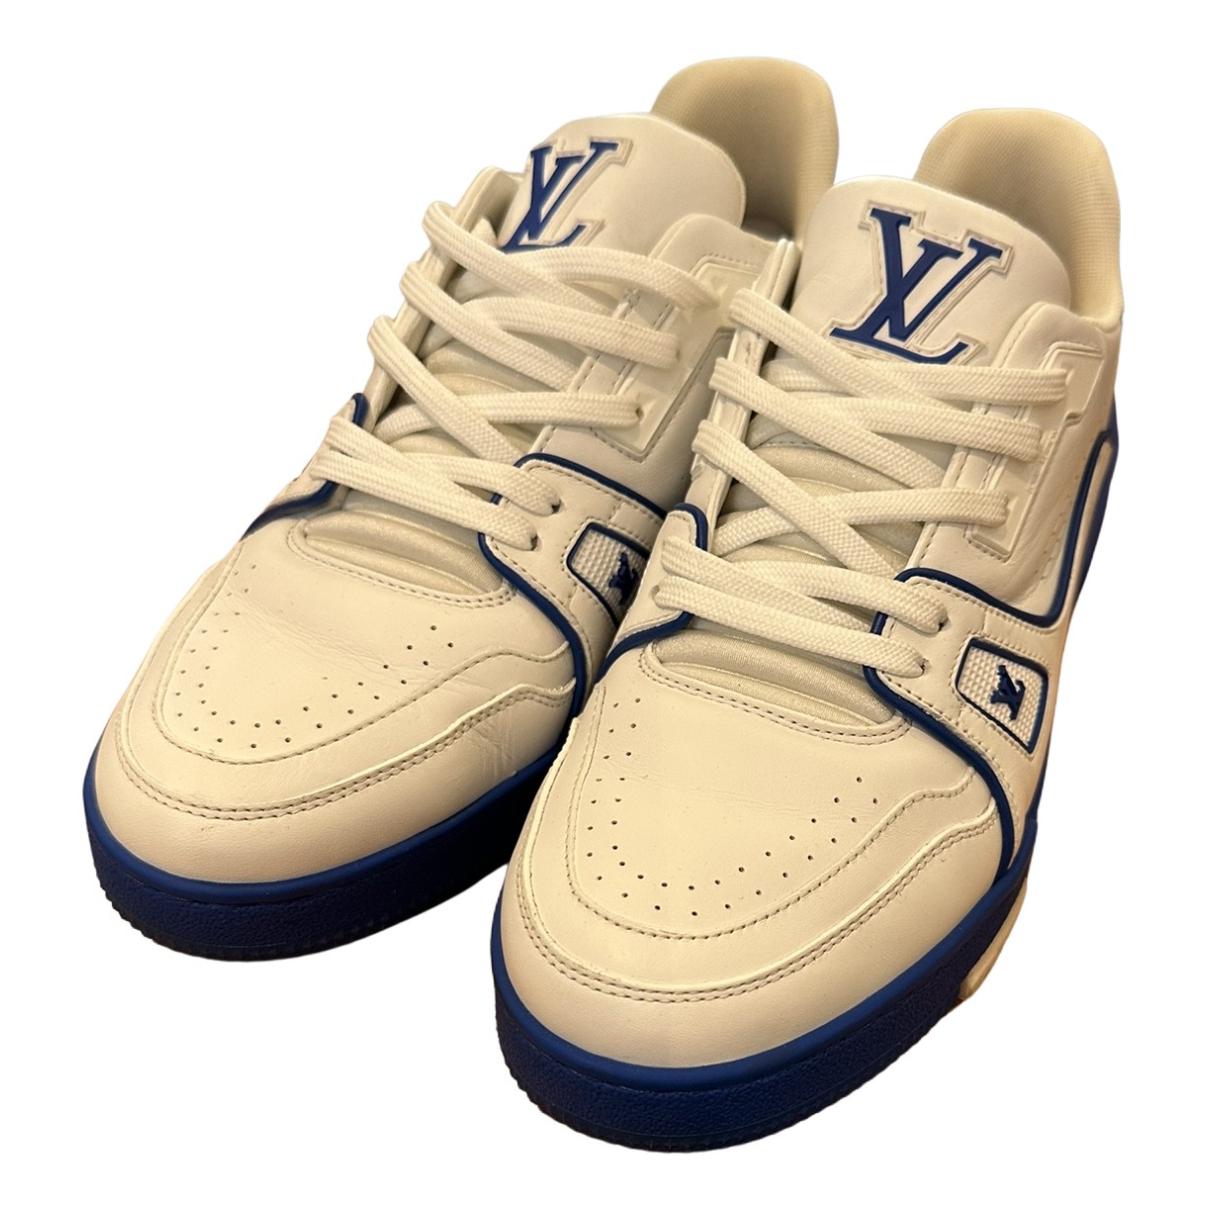 Lv trainer leather low trainers Louis Vuitton Blue size 5 UK in